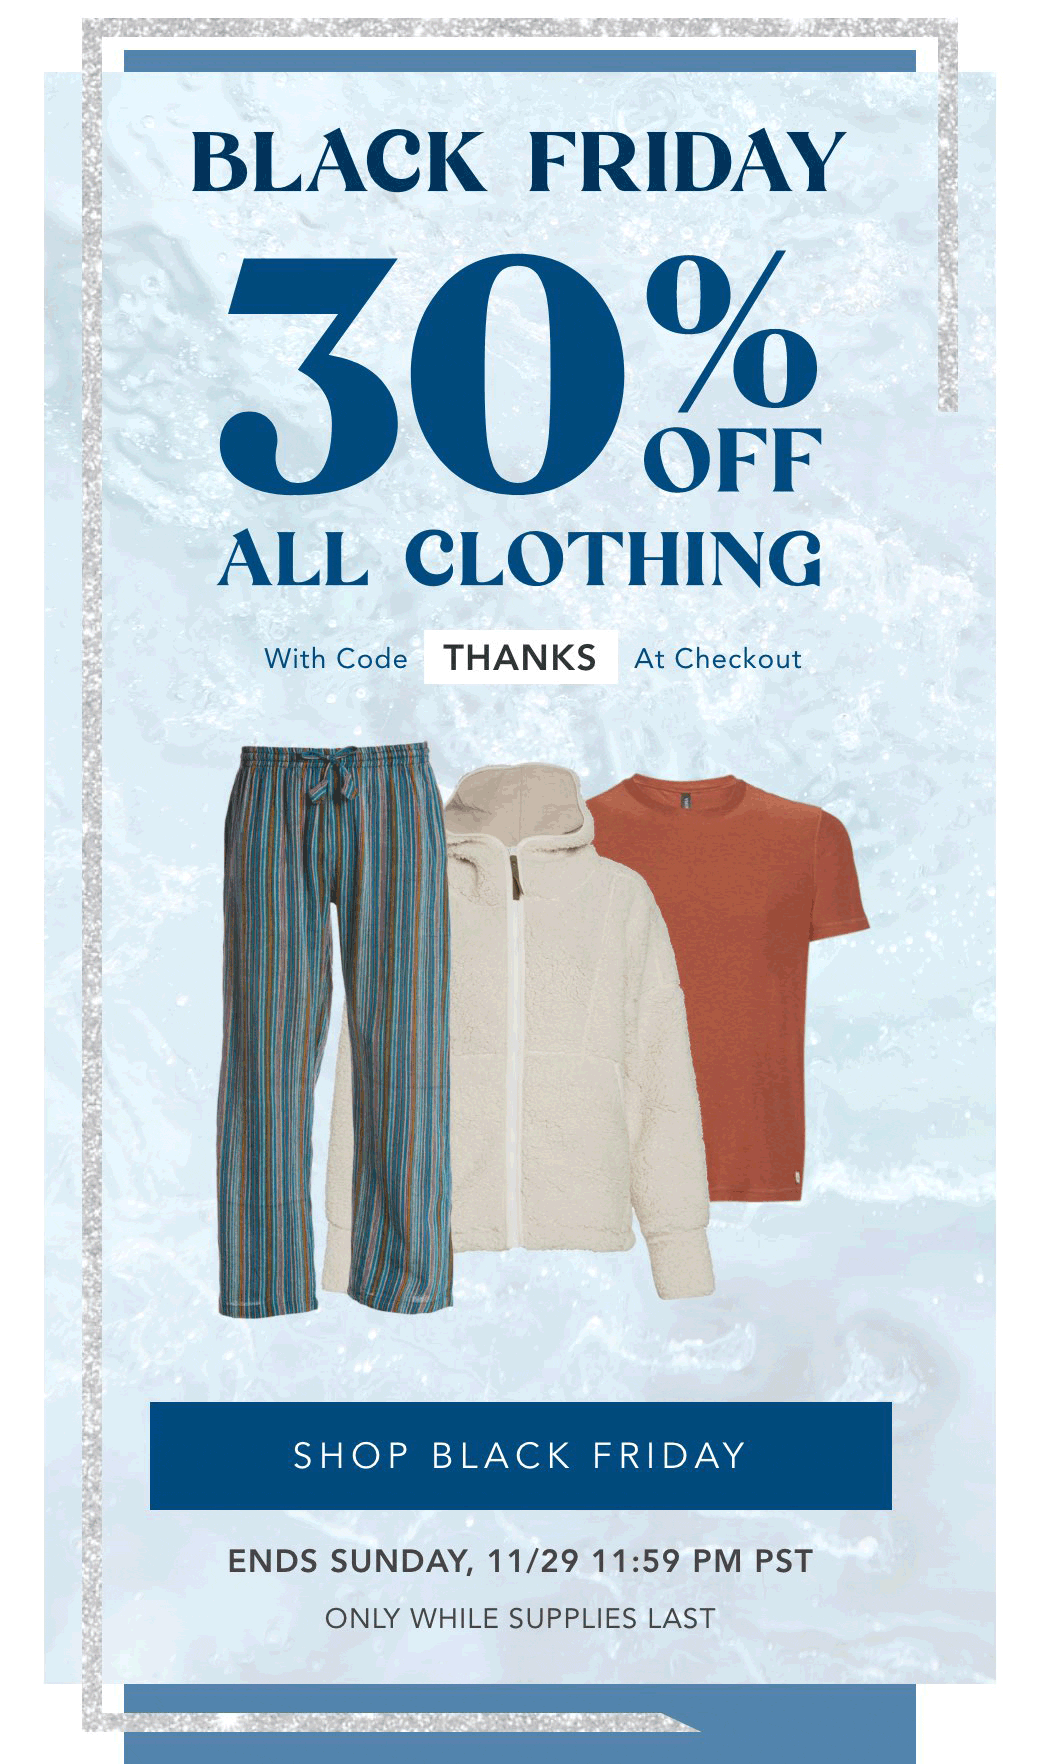 black friday - 30% off all clothing